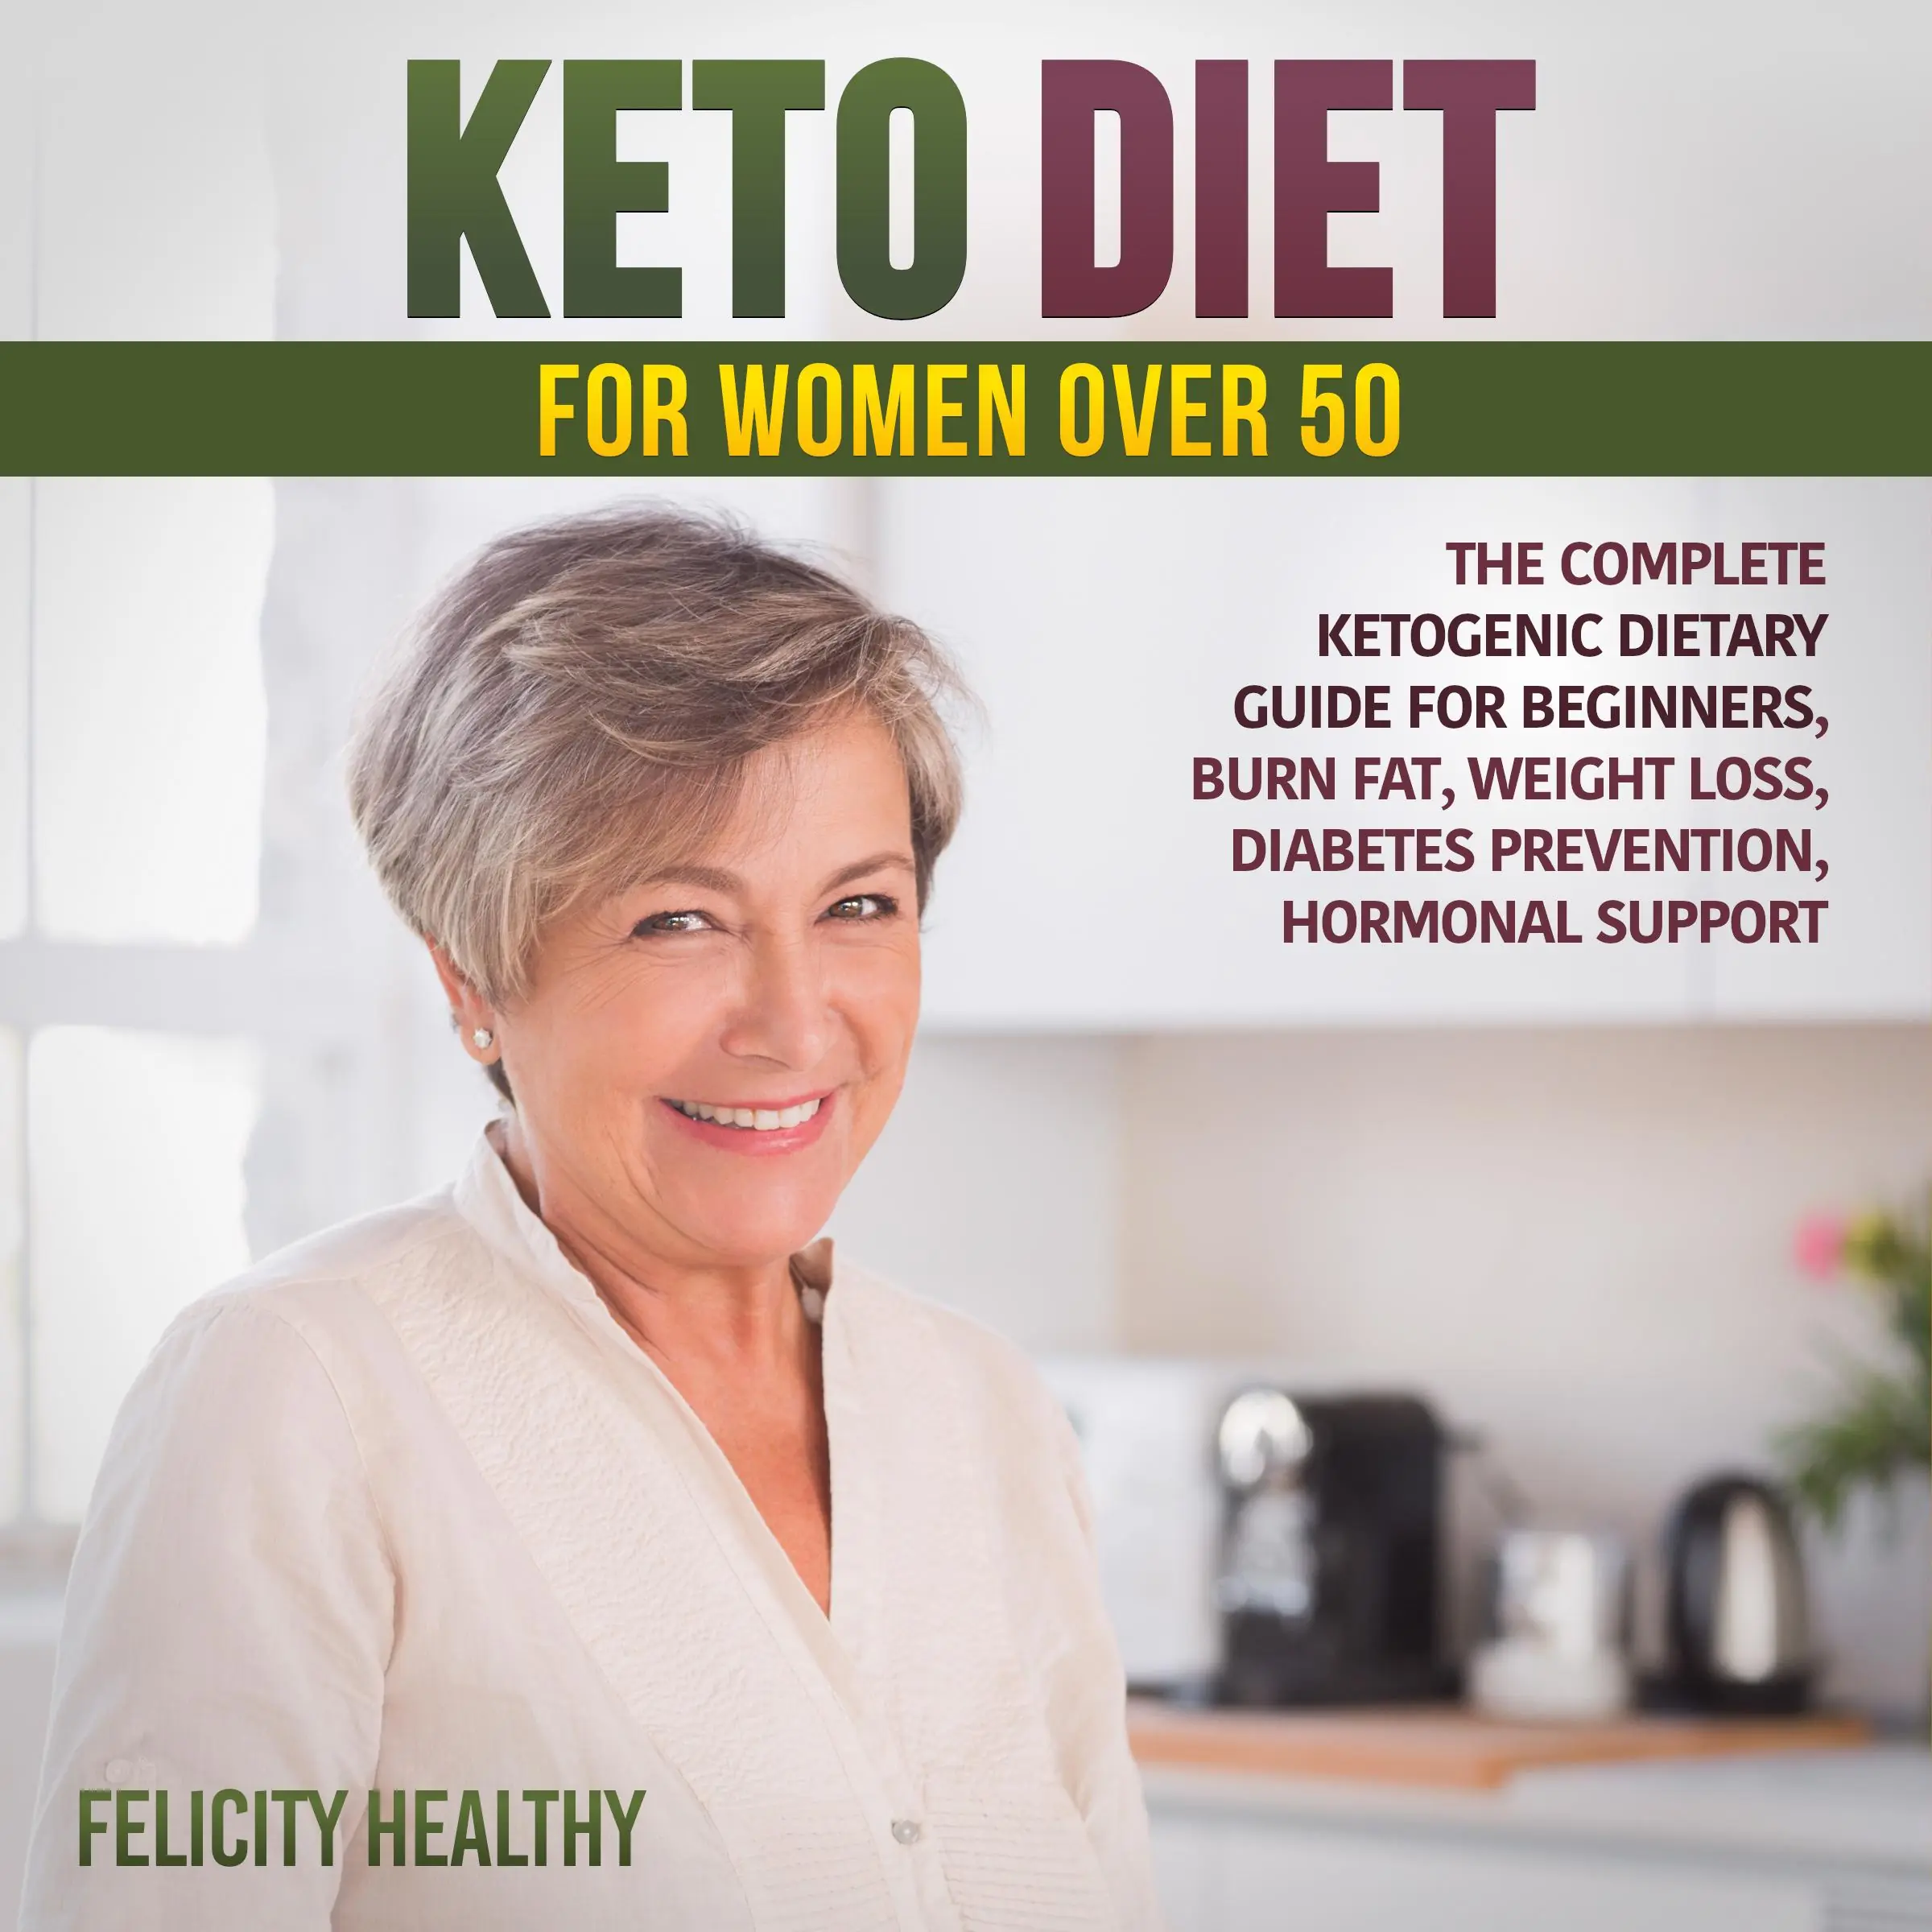 keto diet for women over 50 Audiobook by Felicity Healthy